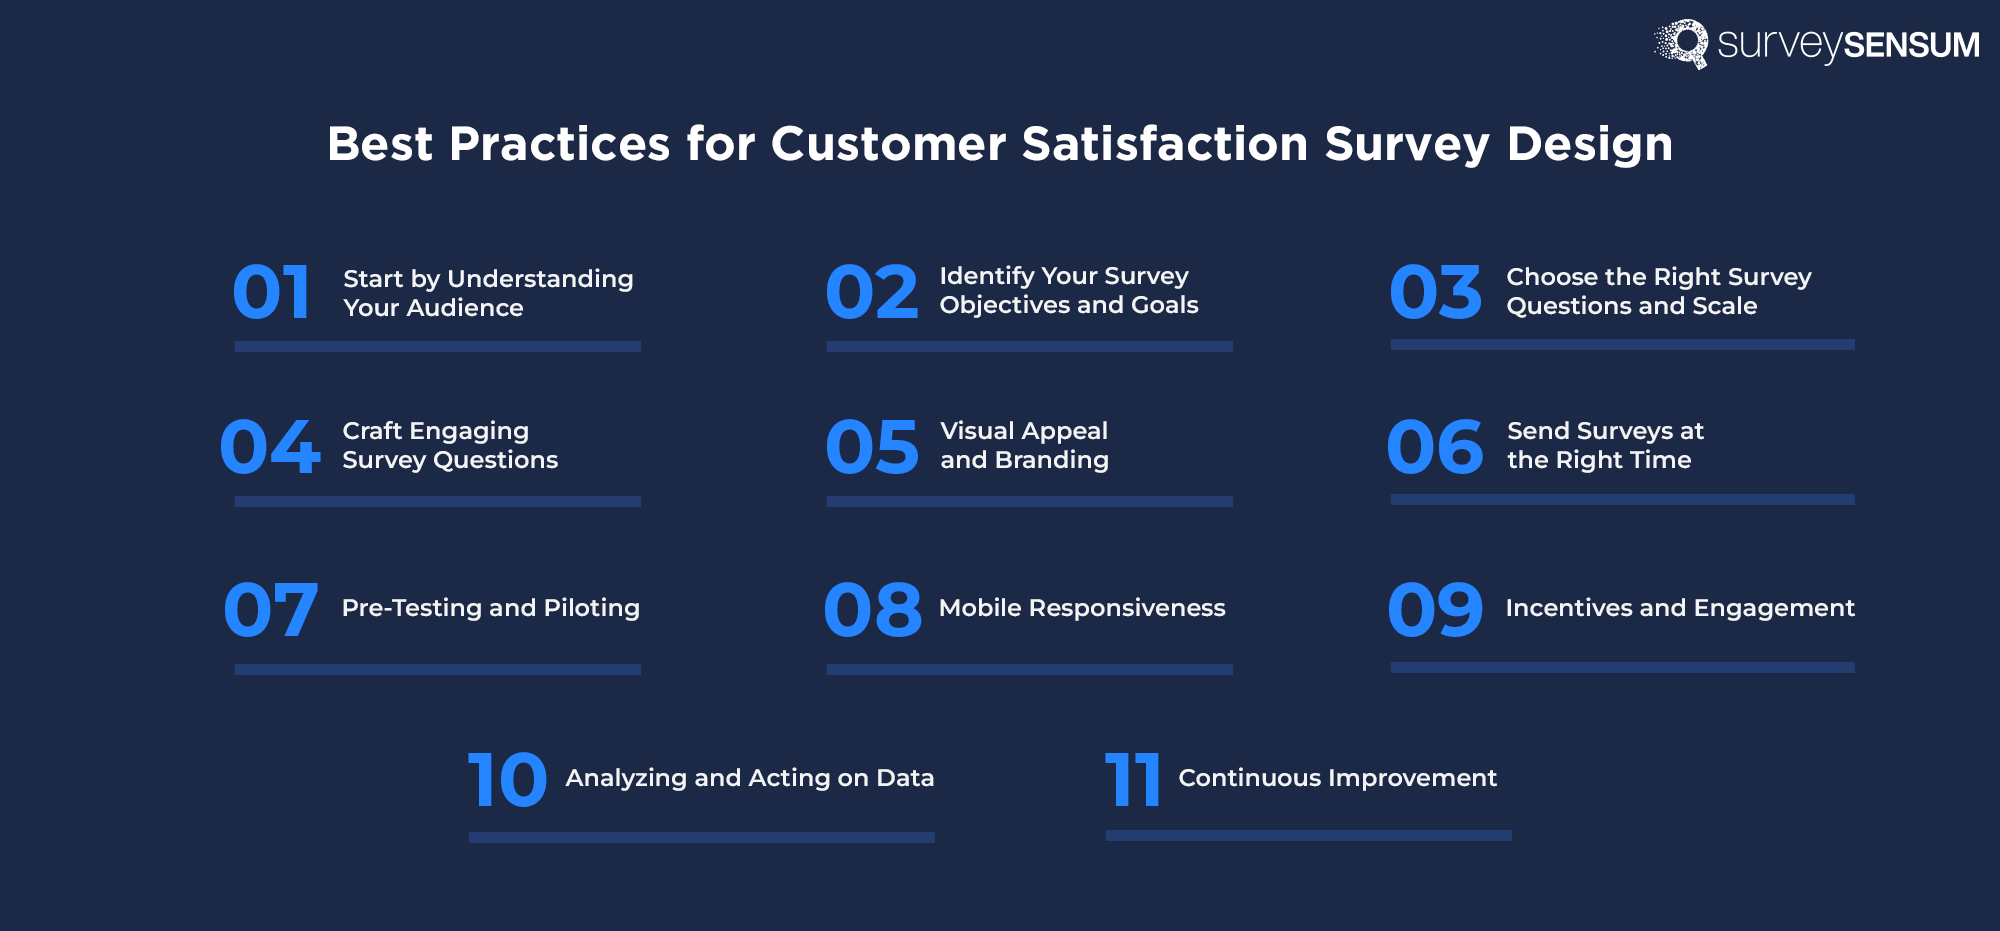 An image that shows a list of 11 best practices for seamless customer satisfaction survey design.